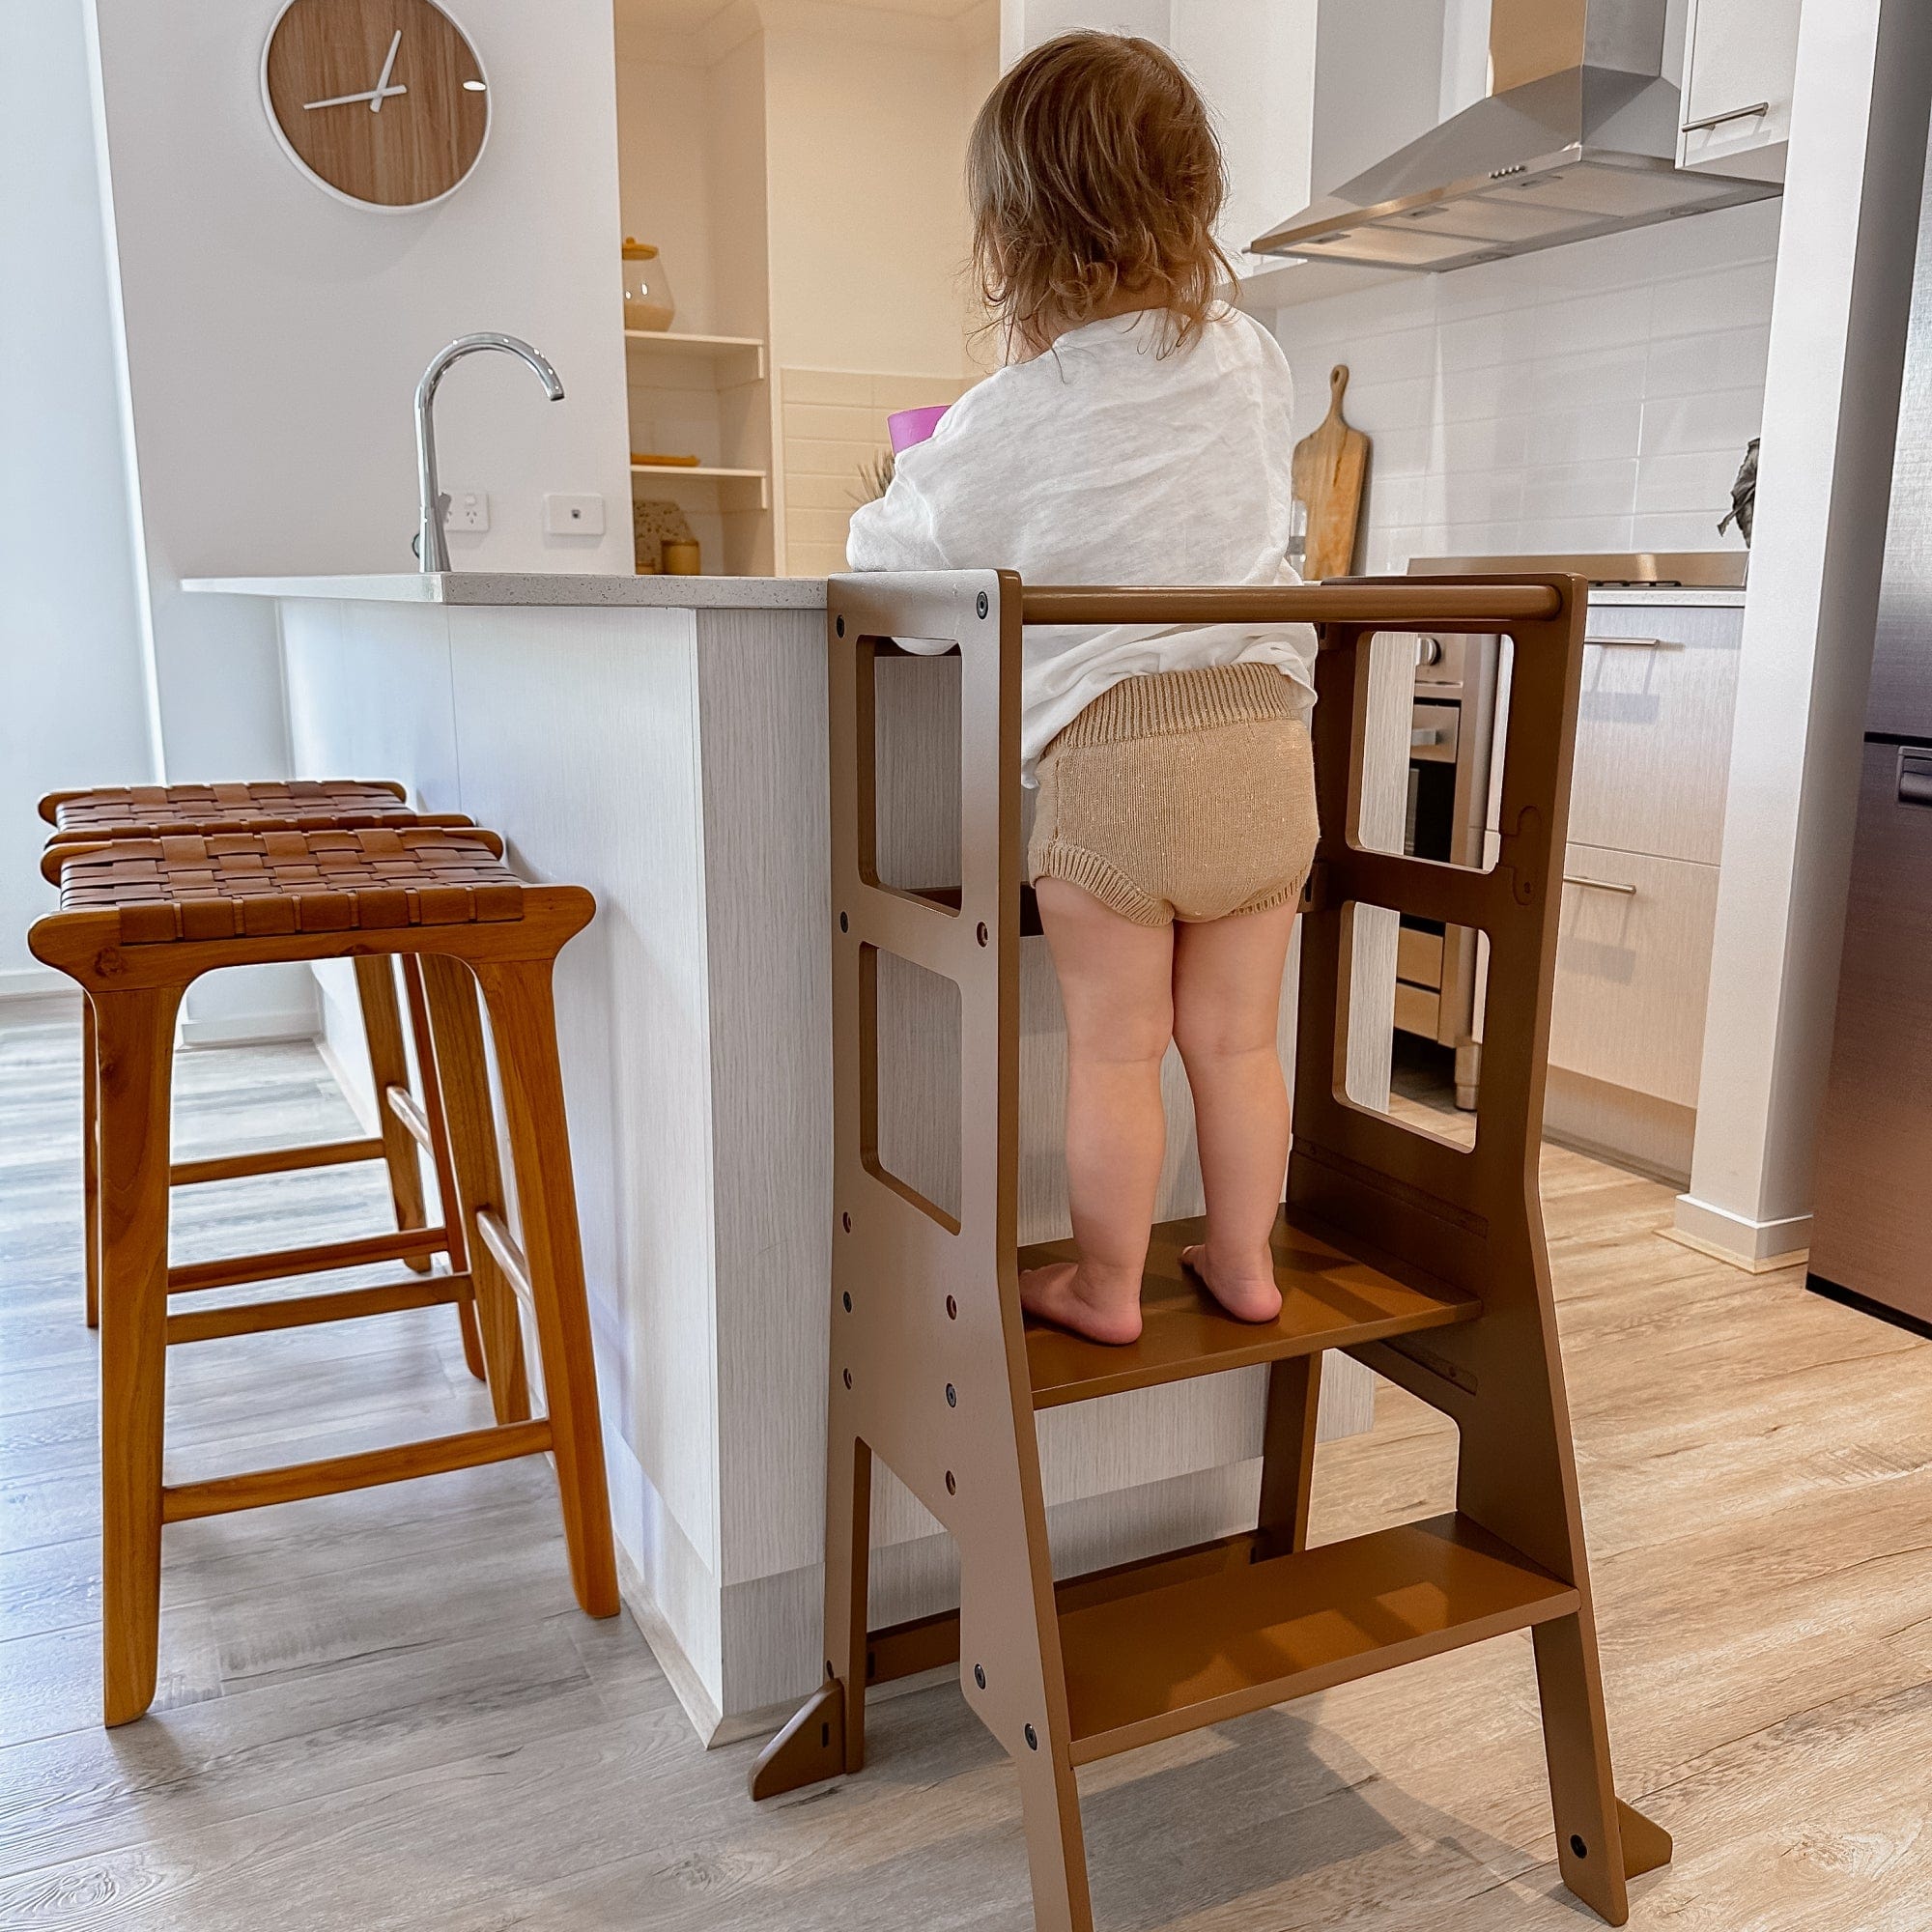 My Duckling JALA Deluxe Adjustable Learning Tower - Walnut